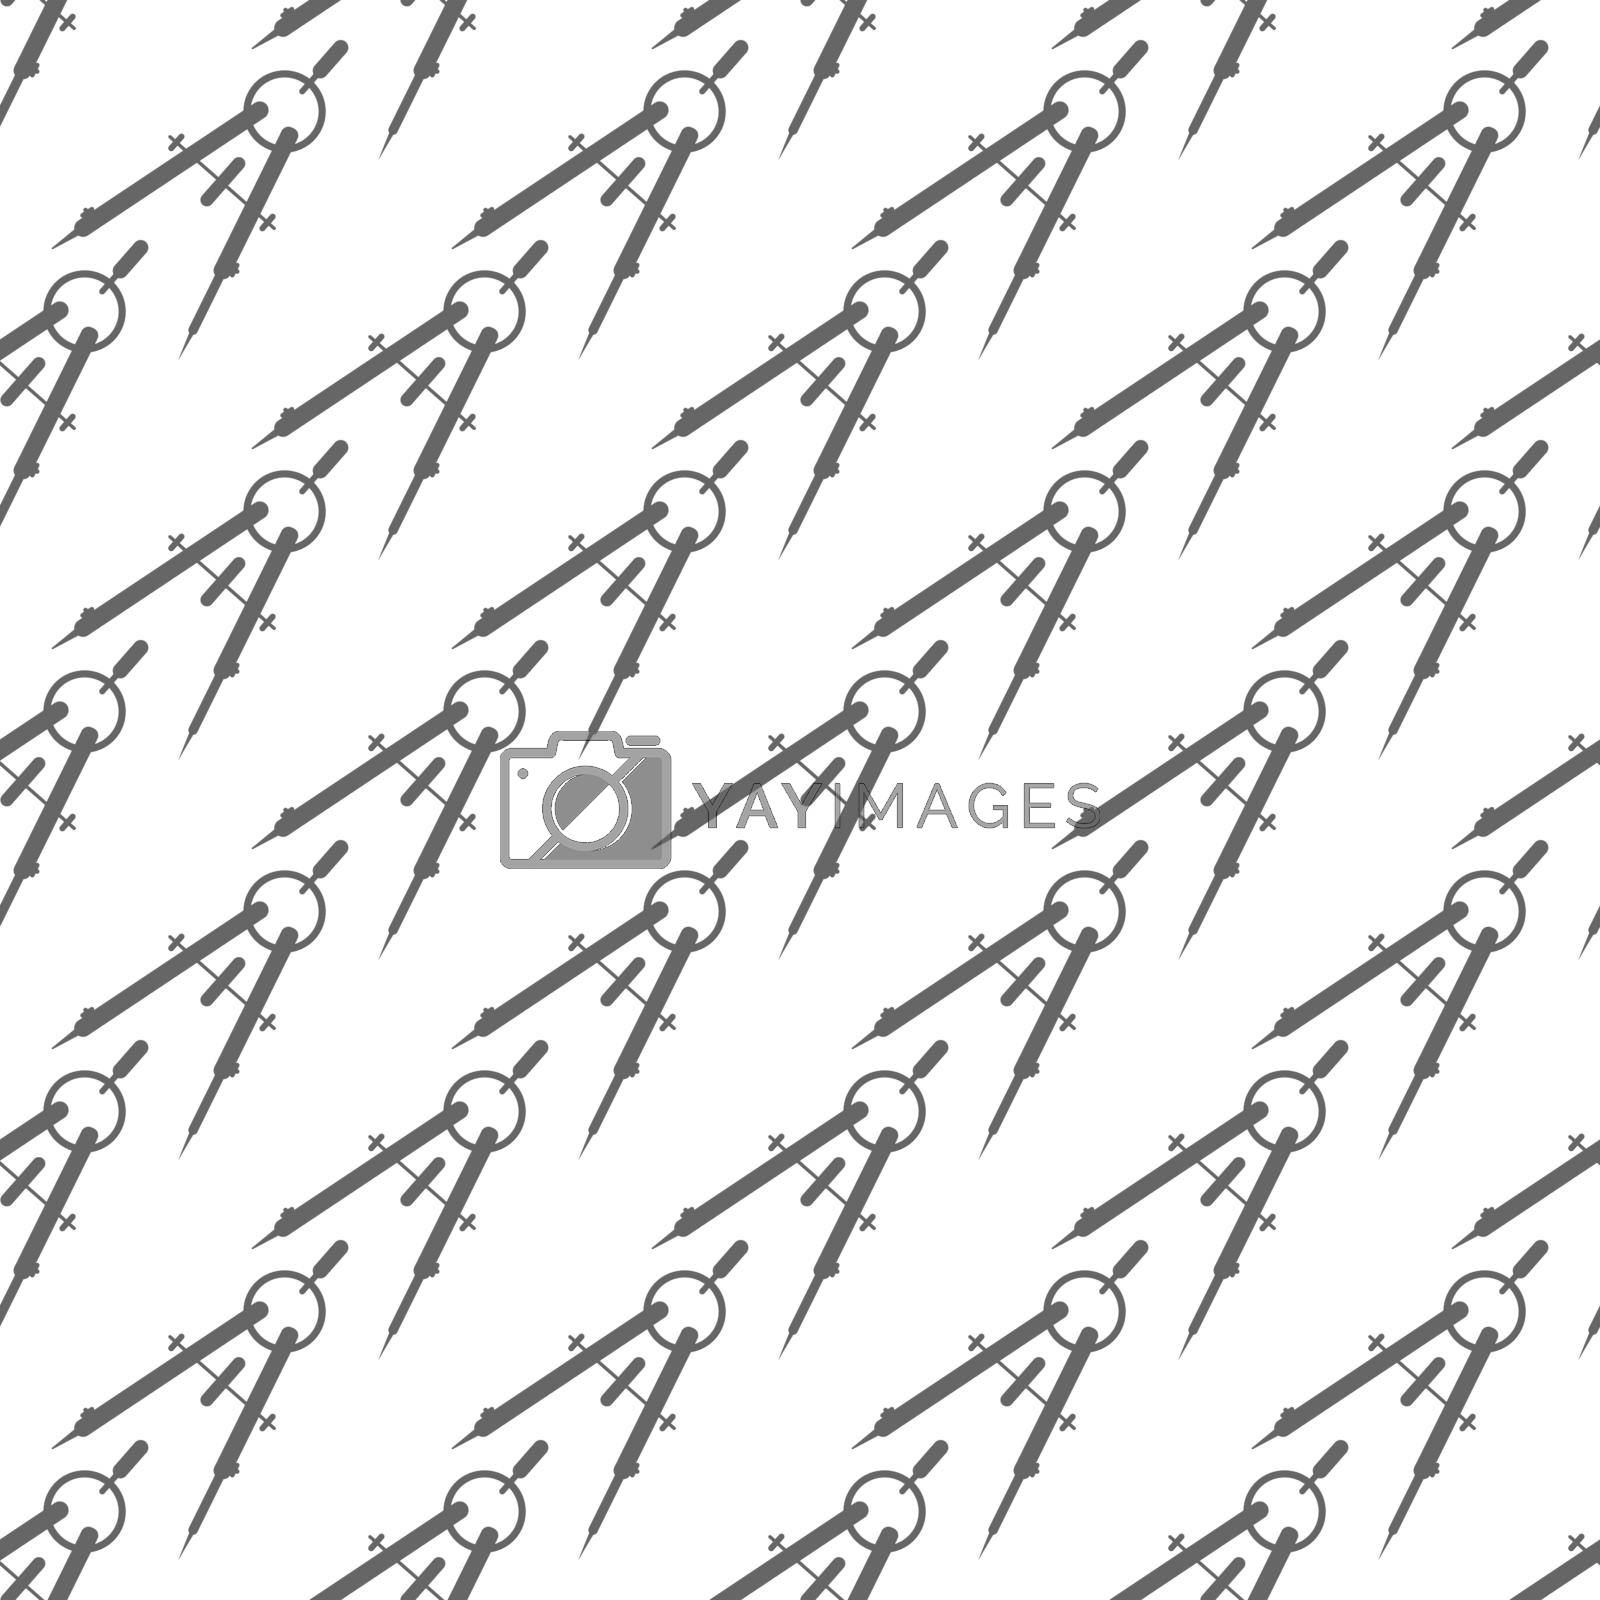 Compasses. Seamless pattern for simple backgrounds. Flat design.